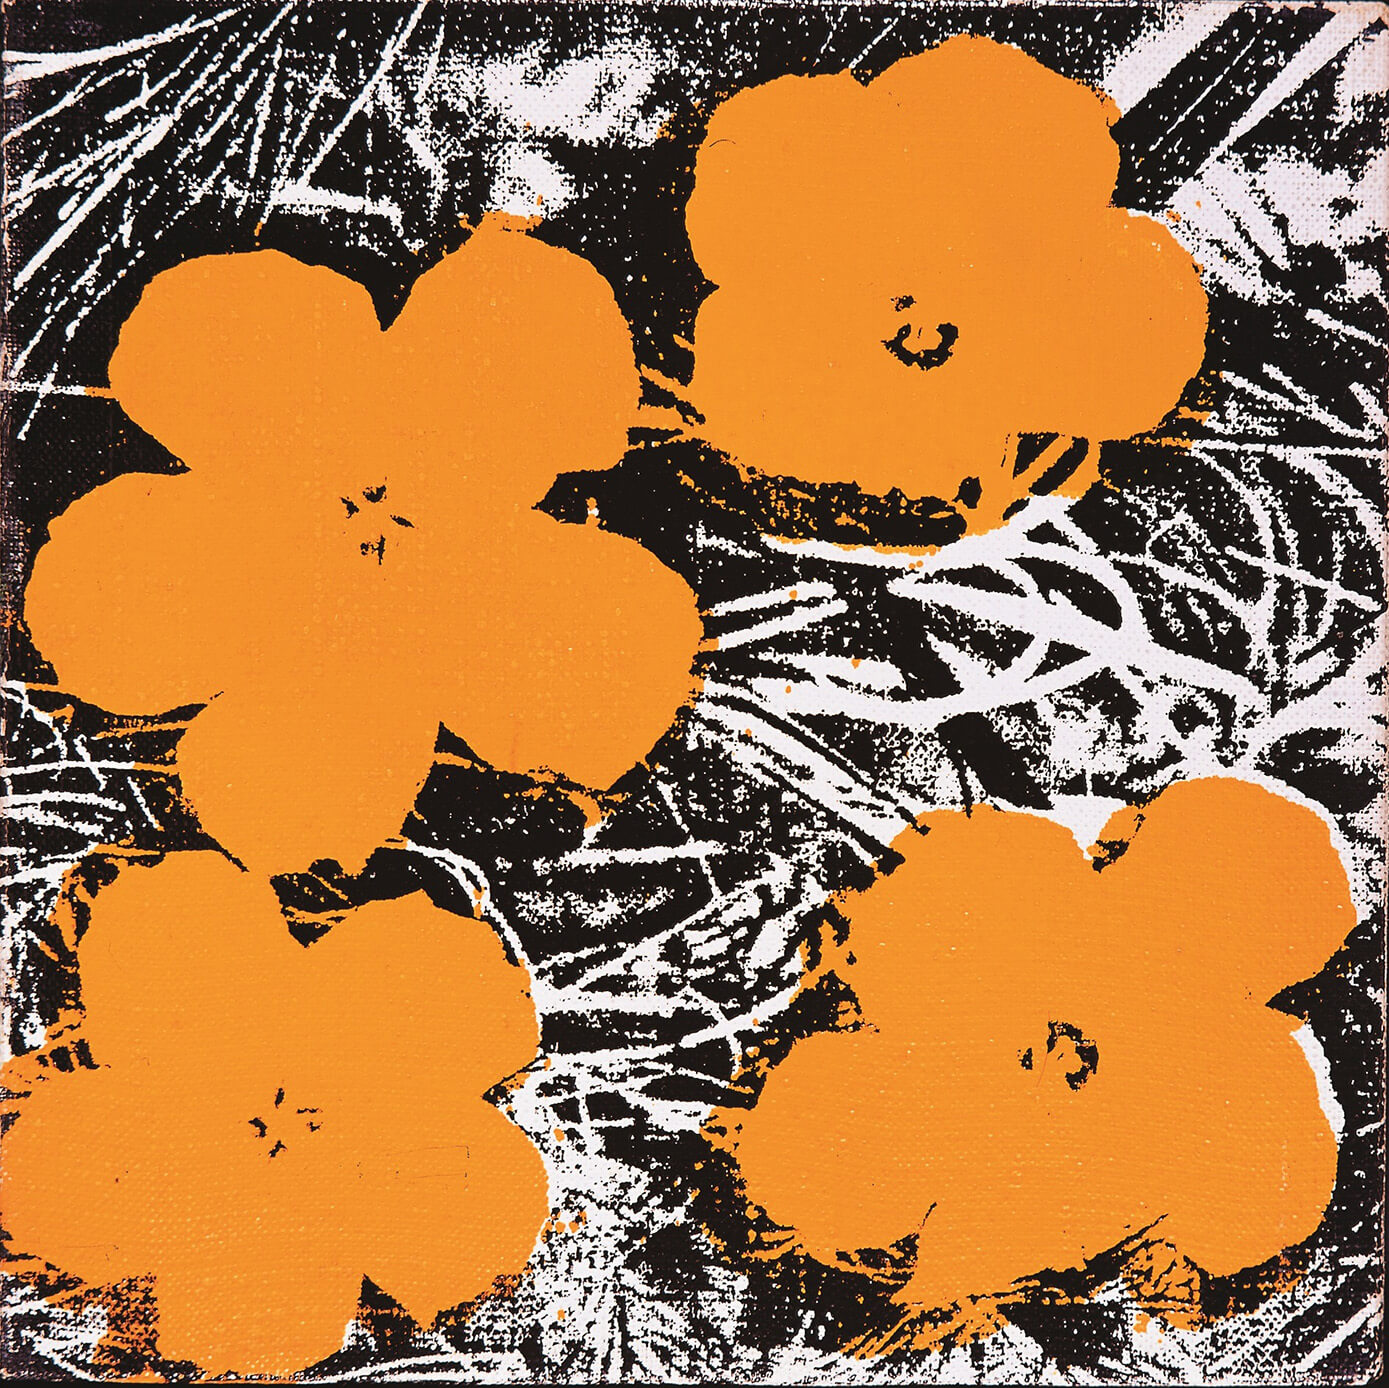 Andy Warhol (1928-1987), Flowers, 1965. © The Andy Warhol Foundation for the Visual Arts, Inc. / ADAGP, Paris 2015.